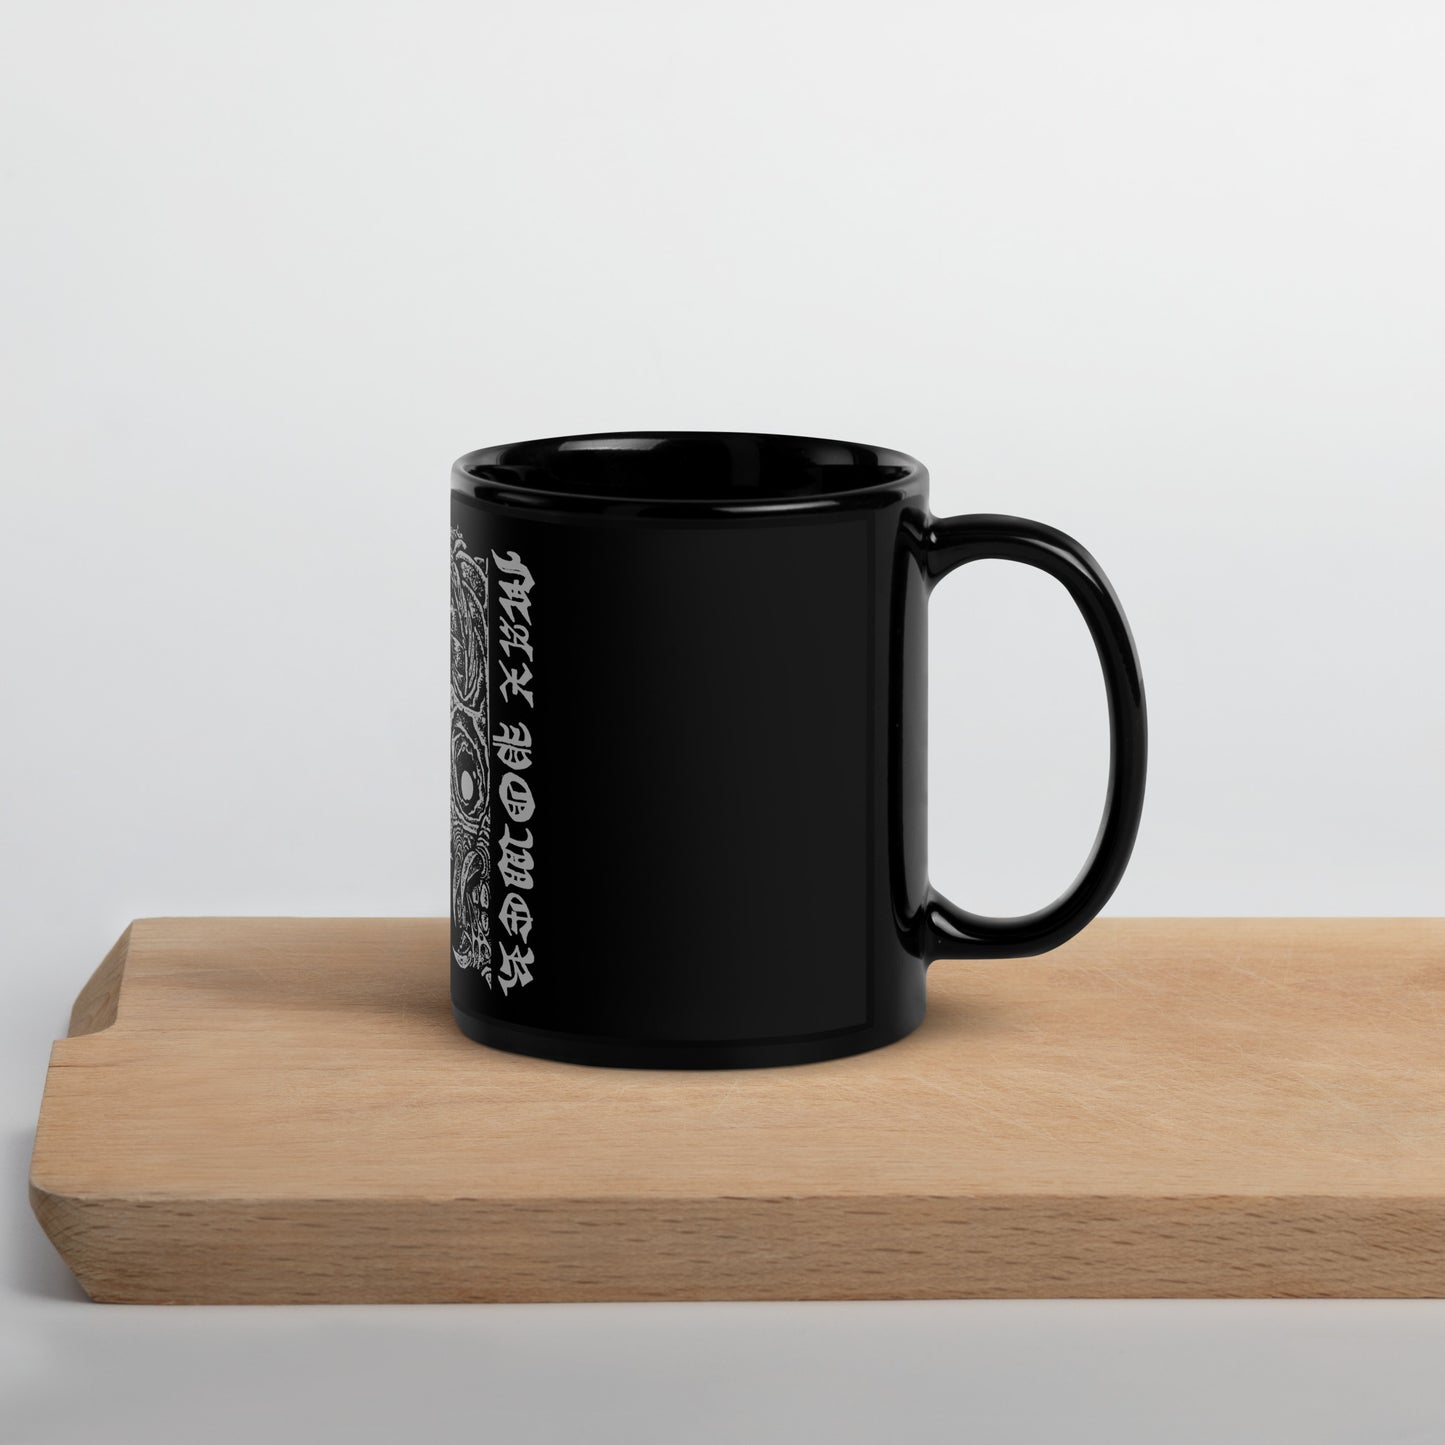 SUPPORT MUSIC AND EVENTS and get the ROCK! AWAY! MONSTER Black Glossy Mug Art by Masato Okano